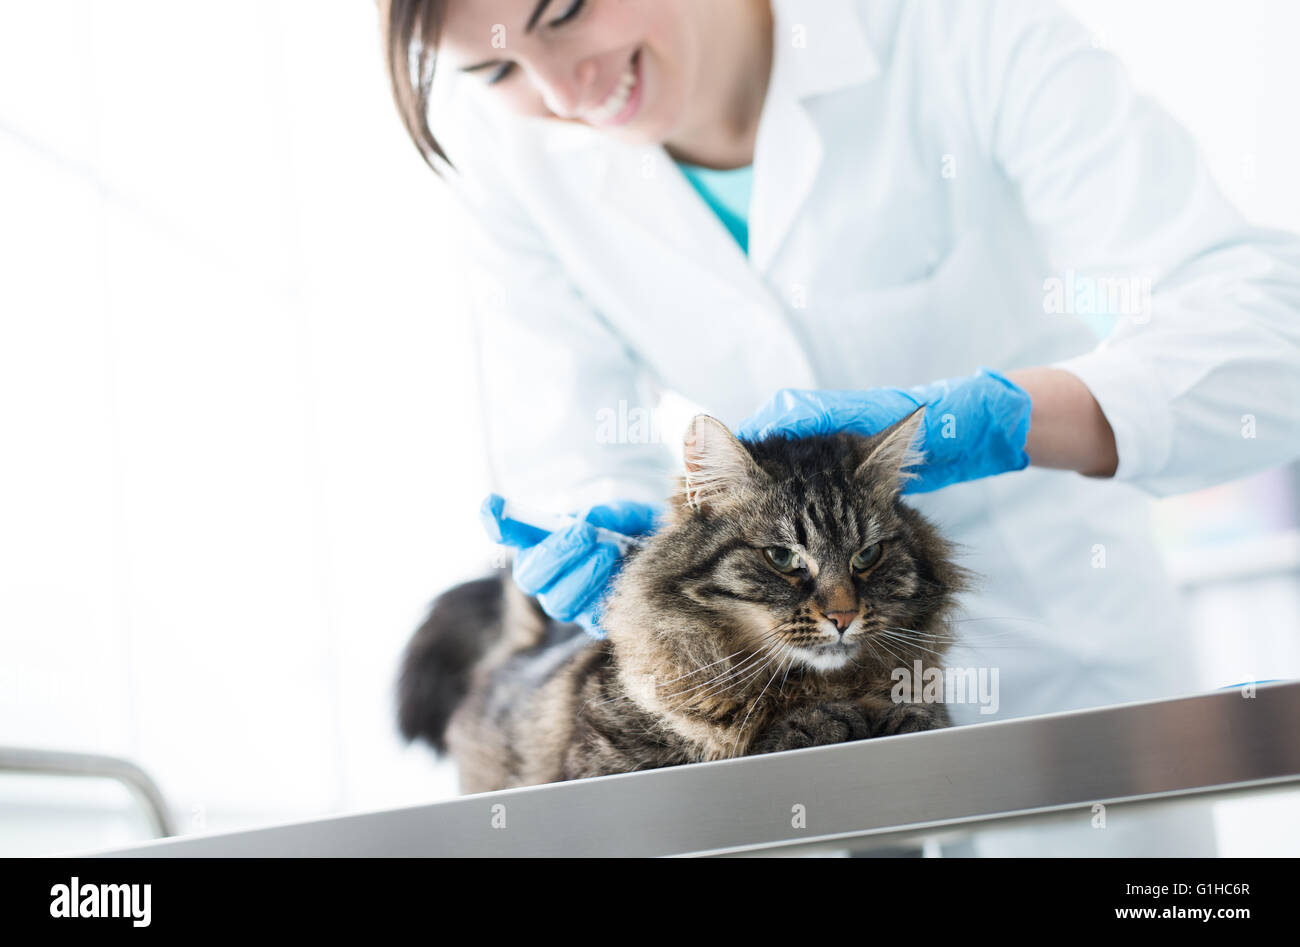 Veterinarian giving an injection to a cat on a surgical table, vaccination and prevention concept Stock Photo